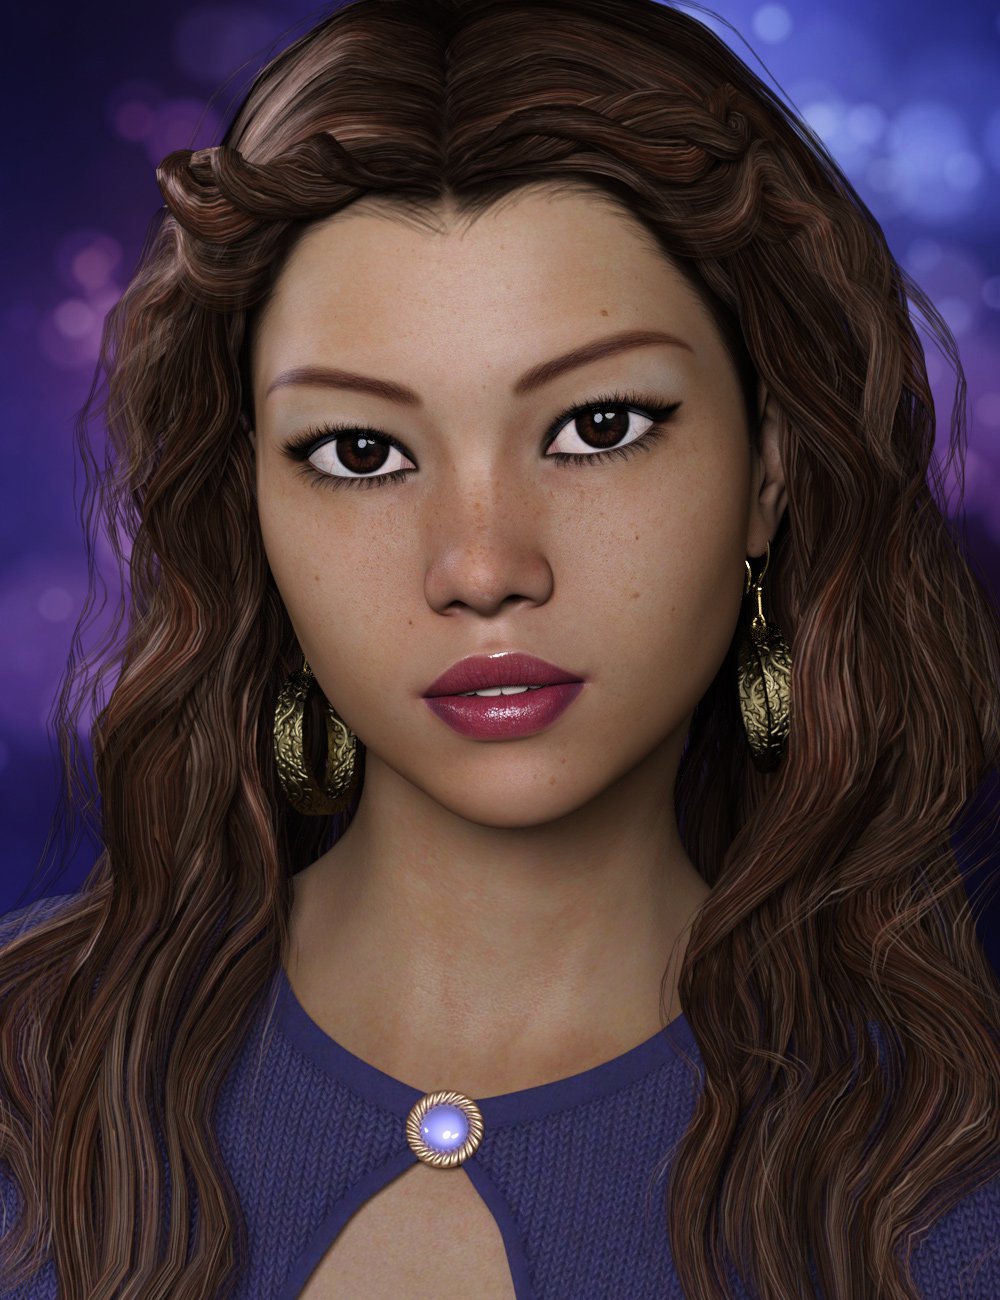 Duncan for Genesis 3 Female and Victoria 7_DAZ3DDL